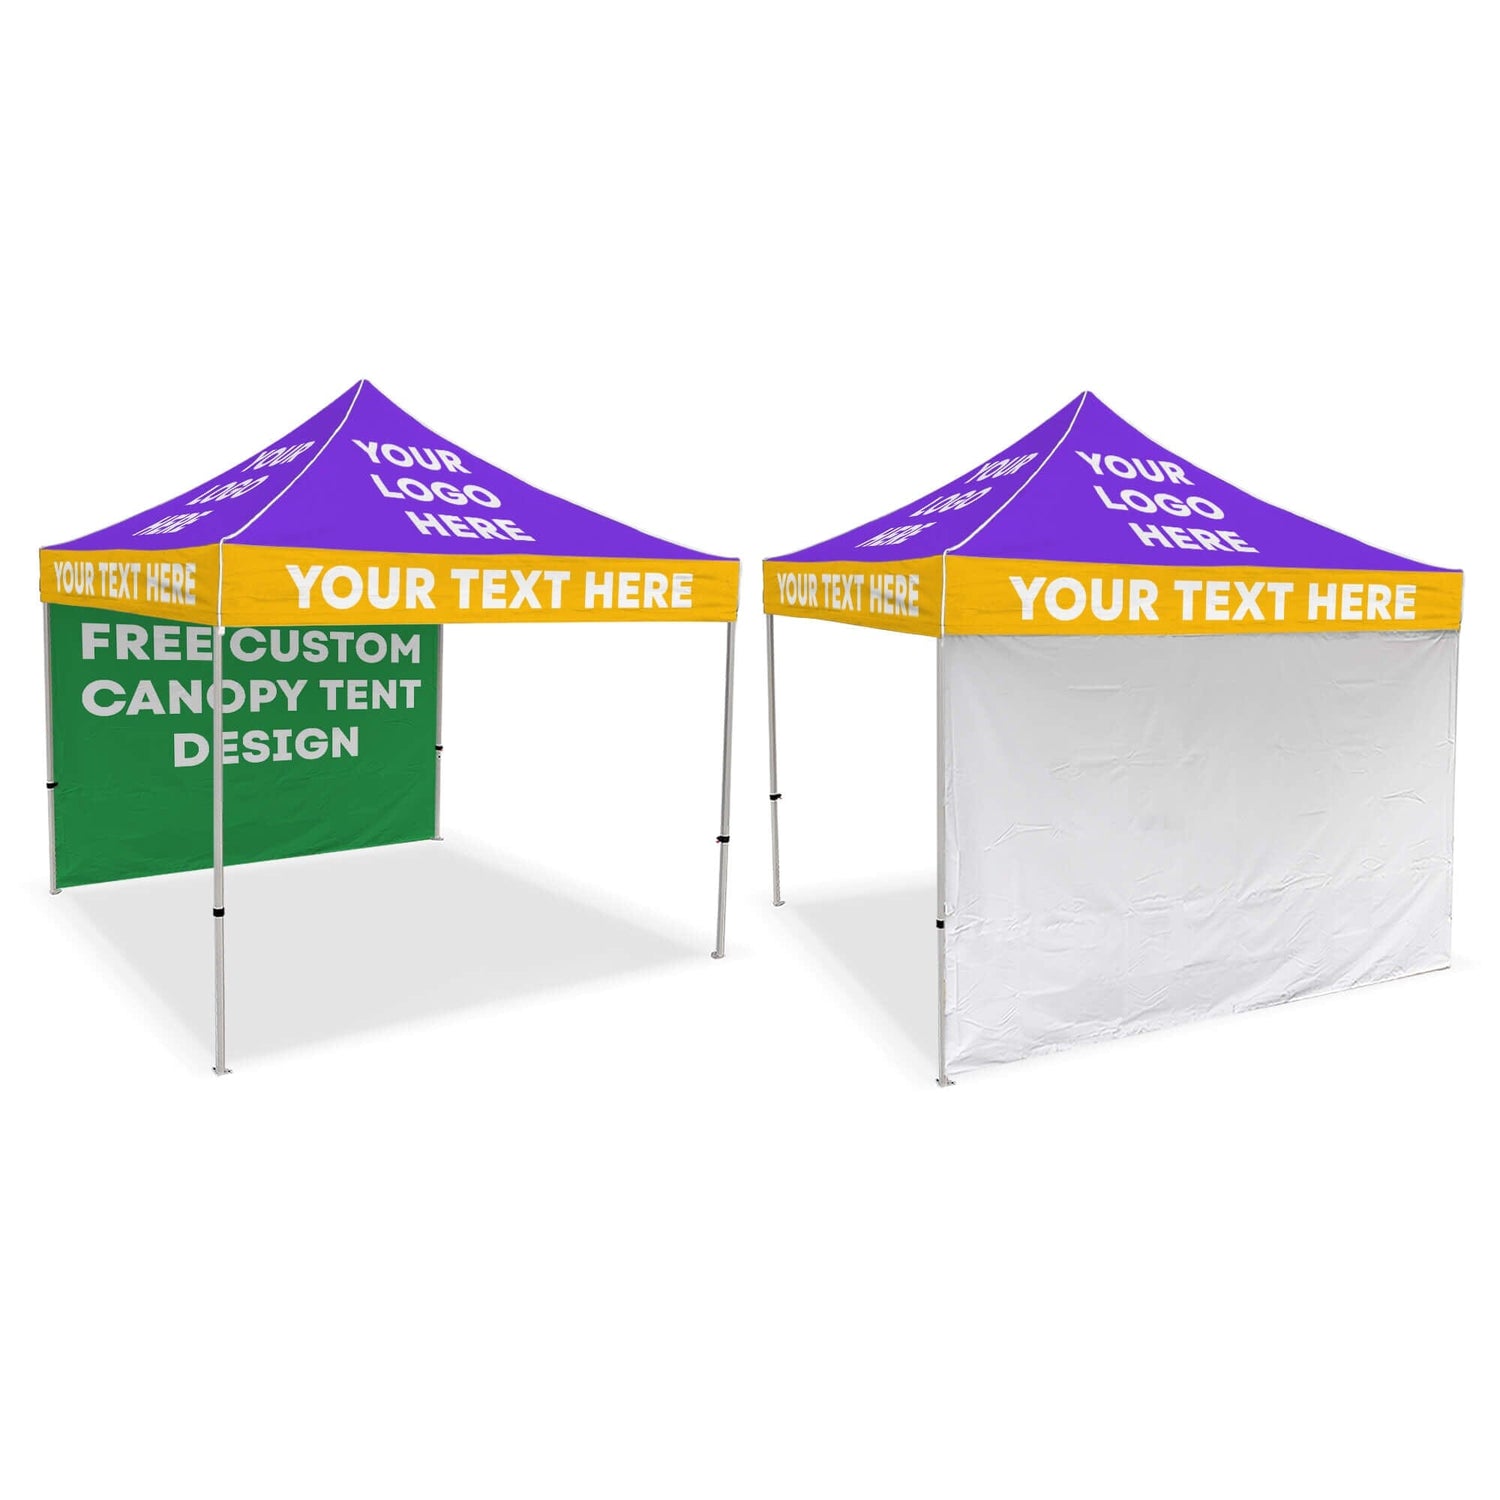 Custom 10x10 Canopy Tent with logo. Design your own custom tent.